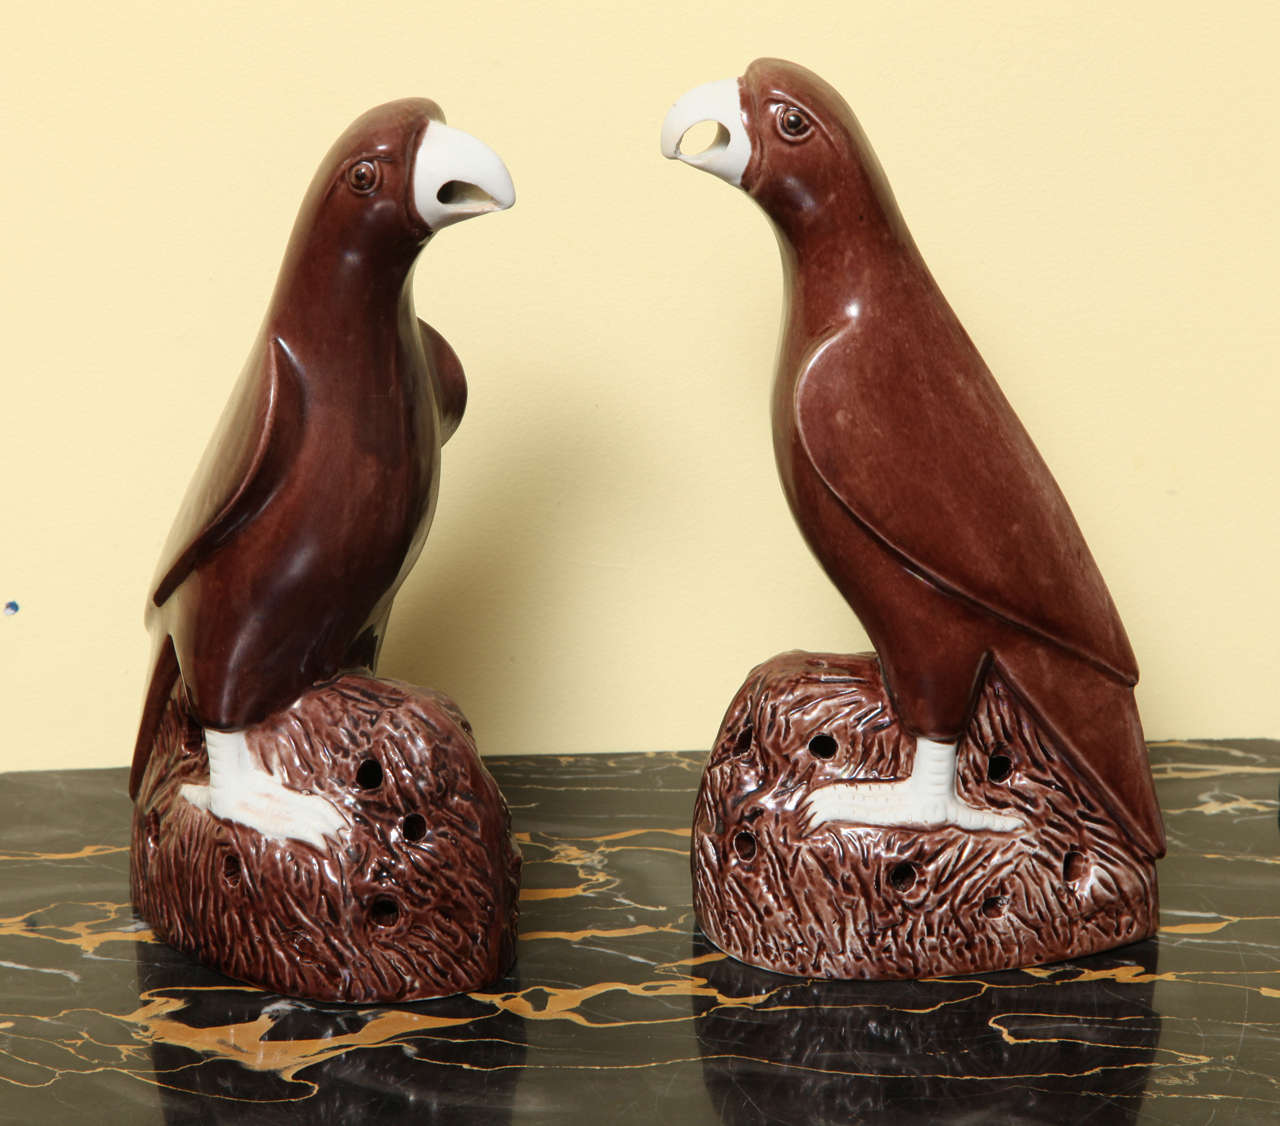 Fine pair of Chinese export porcelain parrots with a brown enamel glaze and non-glazed white biscuit beaks and talons, circa 1850.